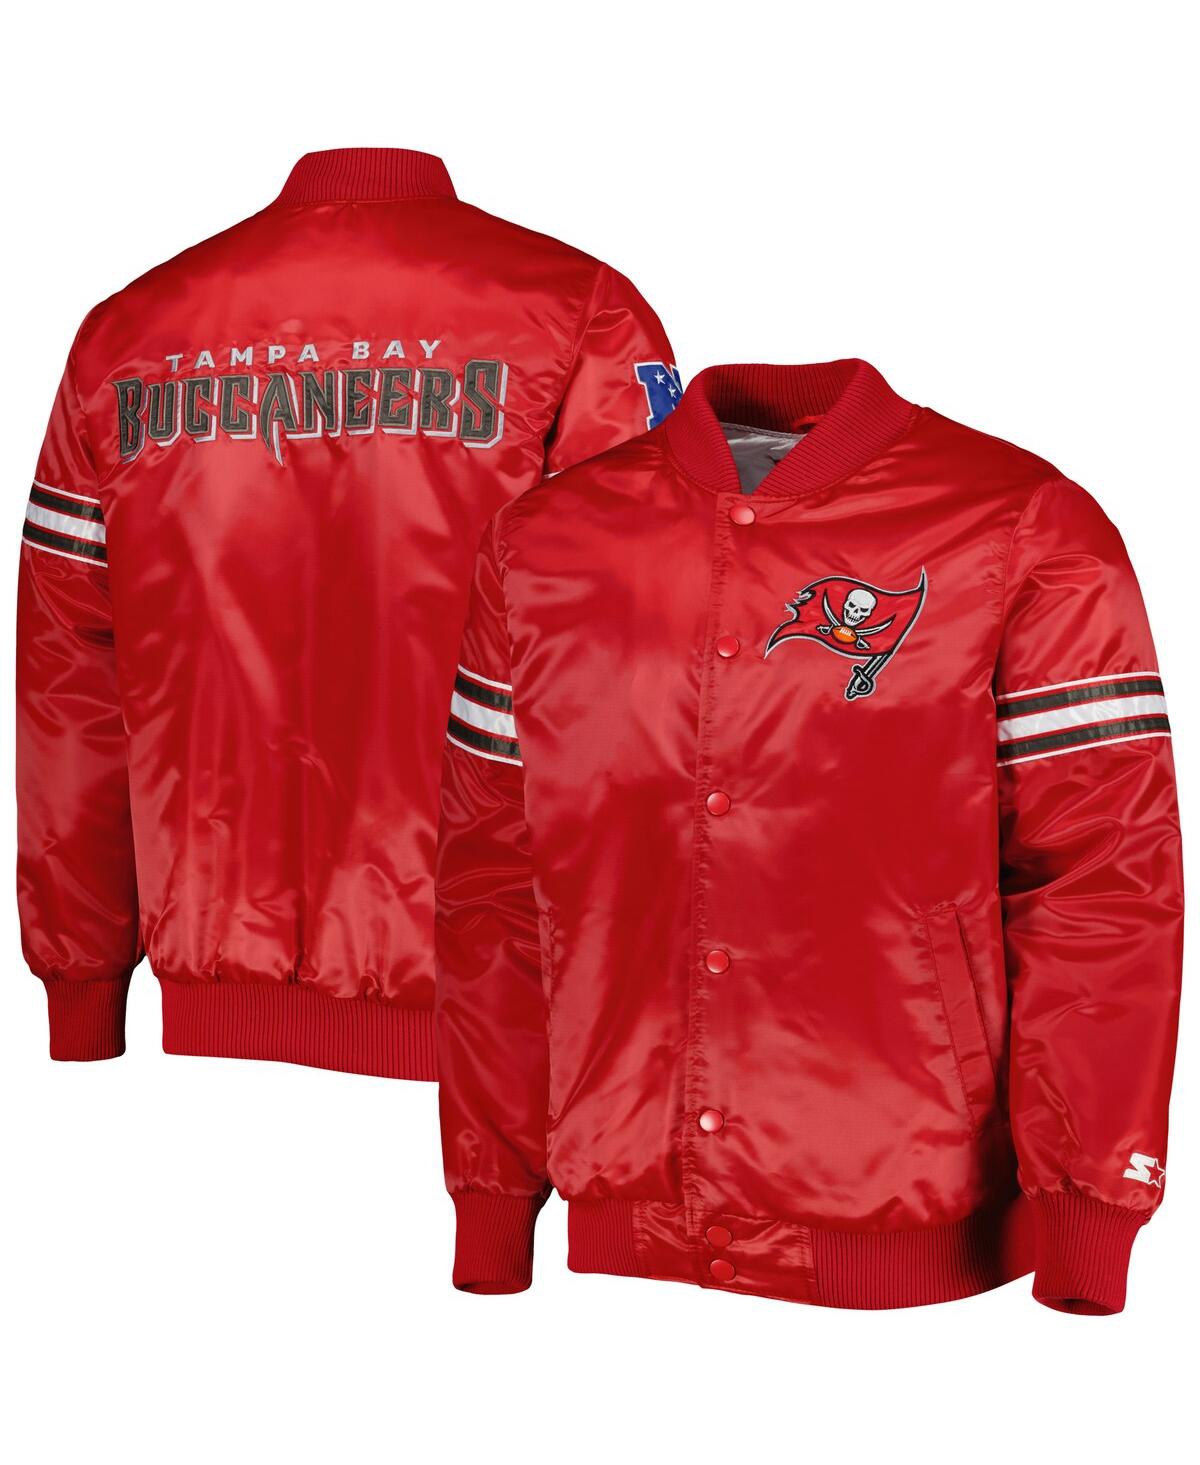 Men's Starter Red Tampa Bay Buccaneers The Pick and Roll Full-Snap Jacket - Red